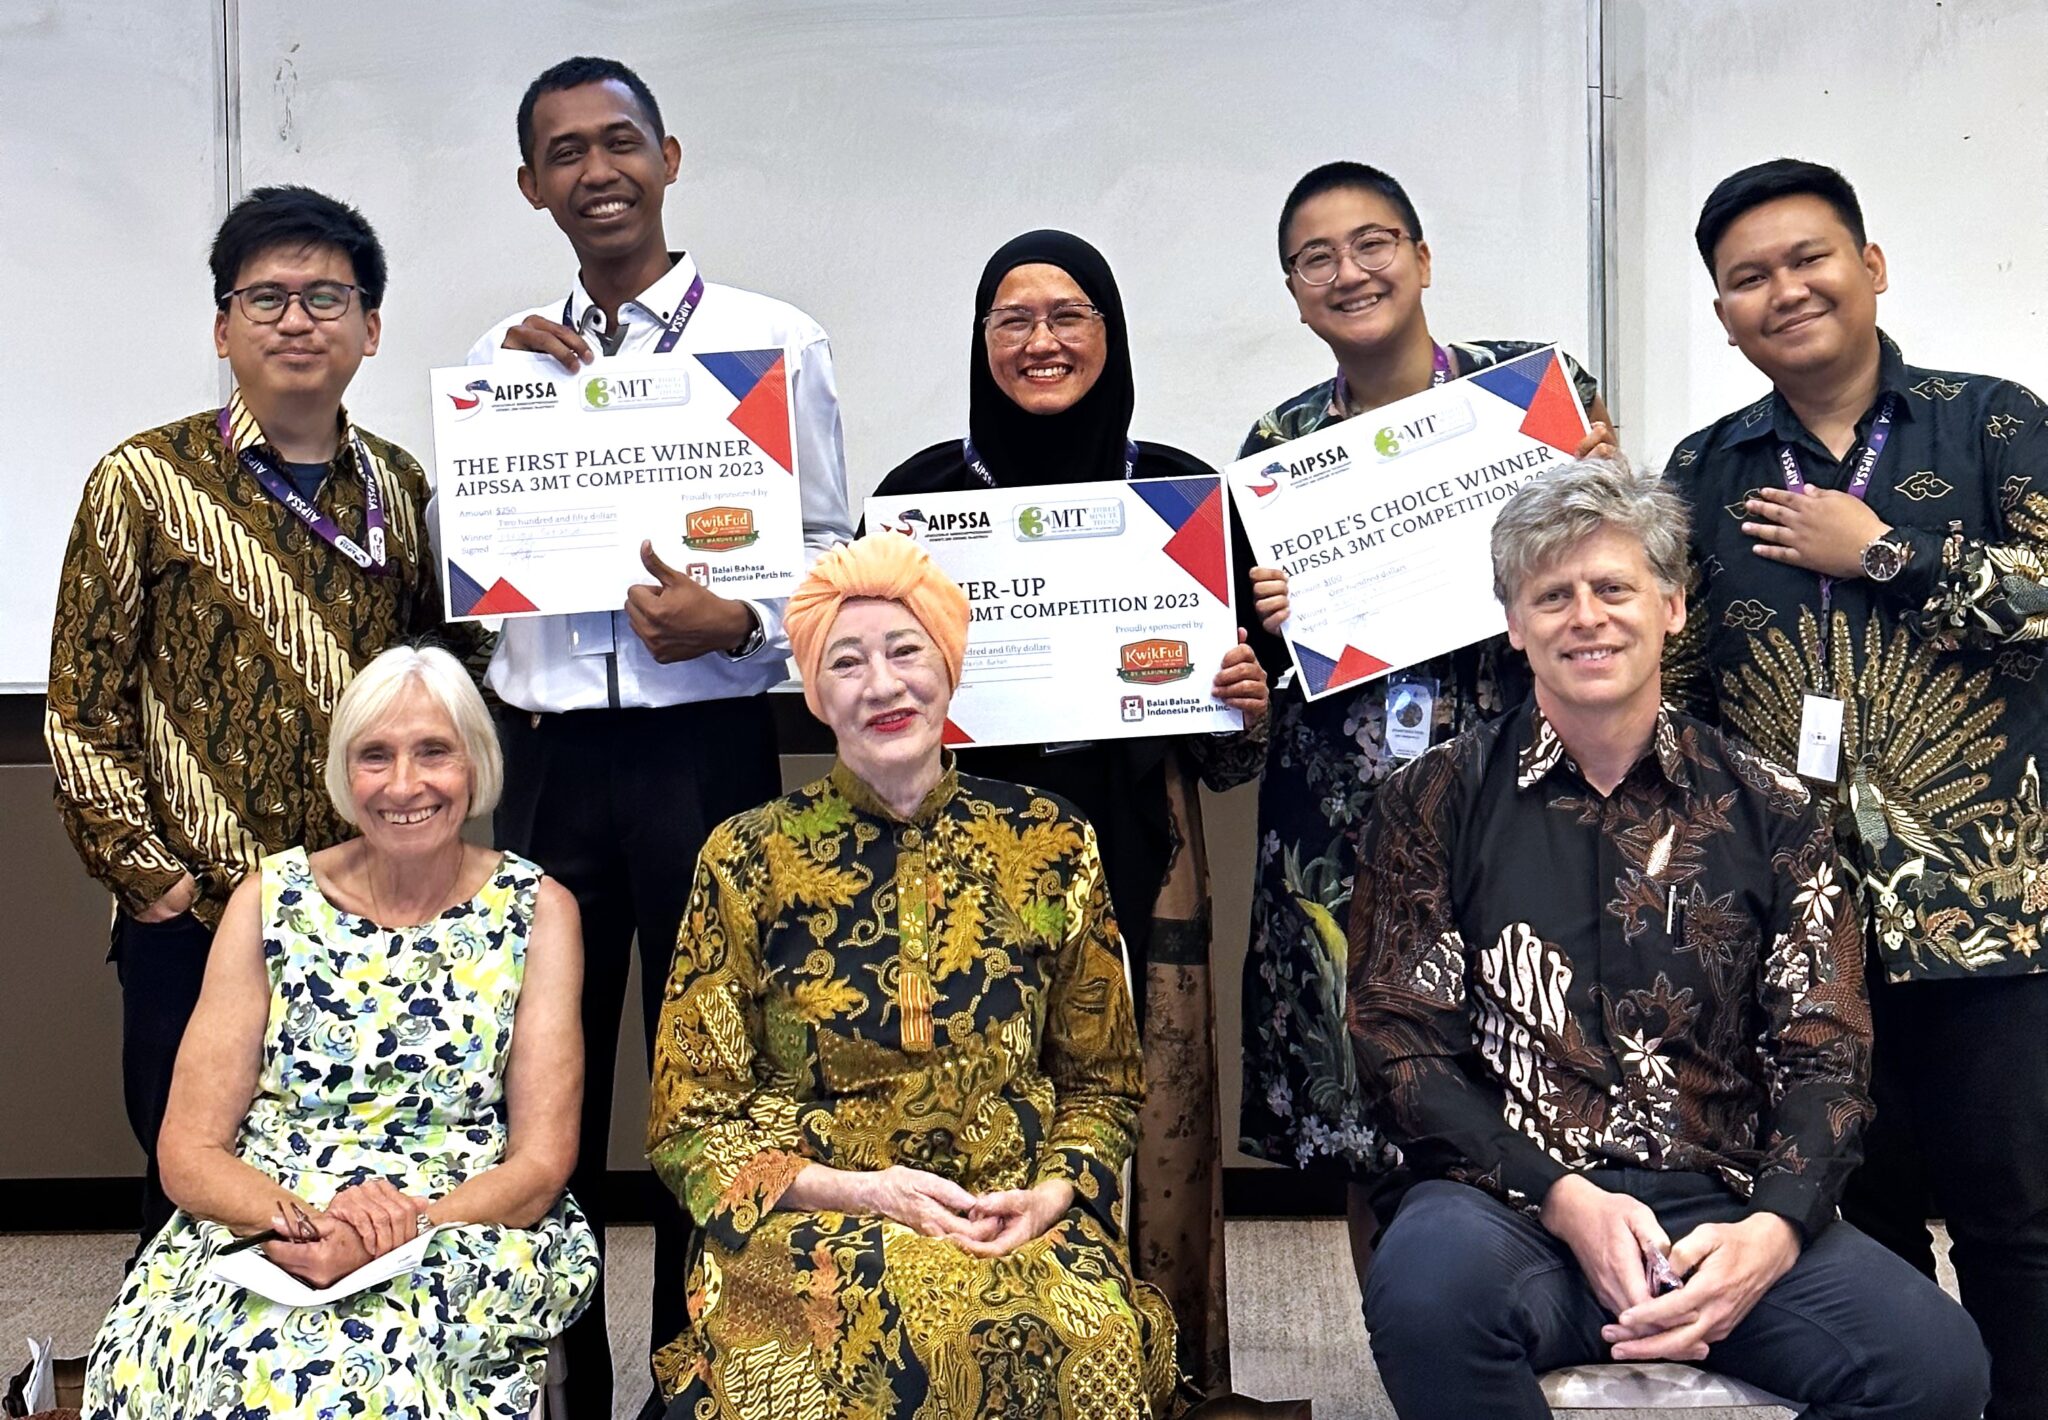 The winners of AIPSSA 3MT Competition 2023